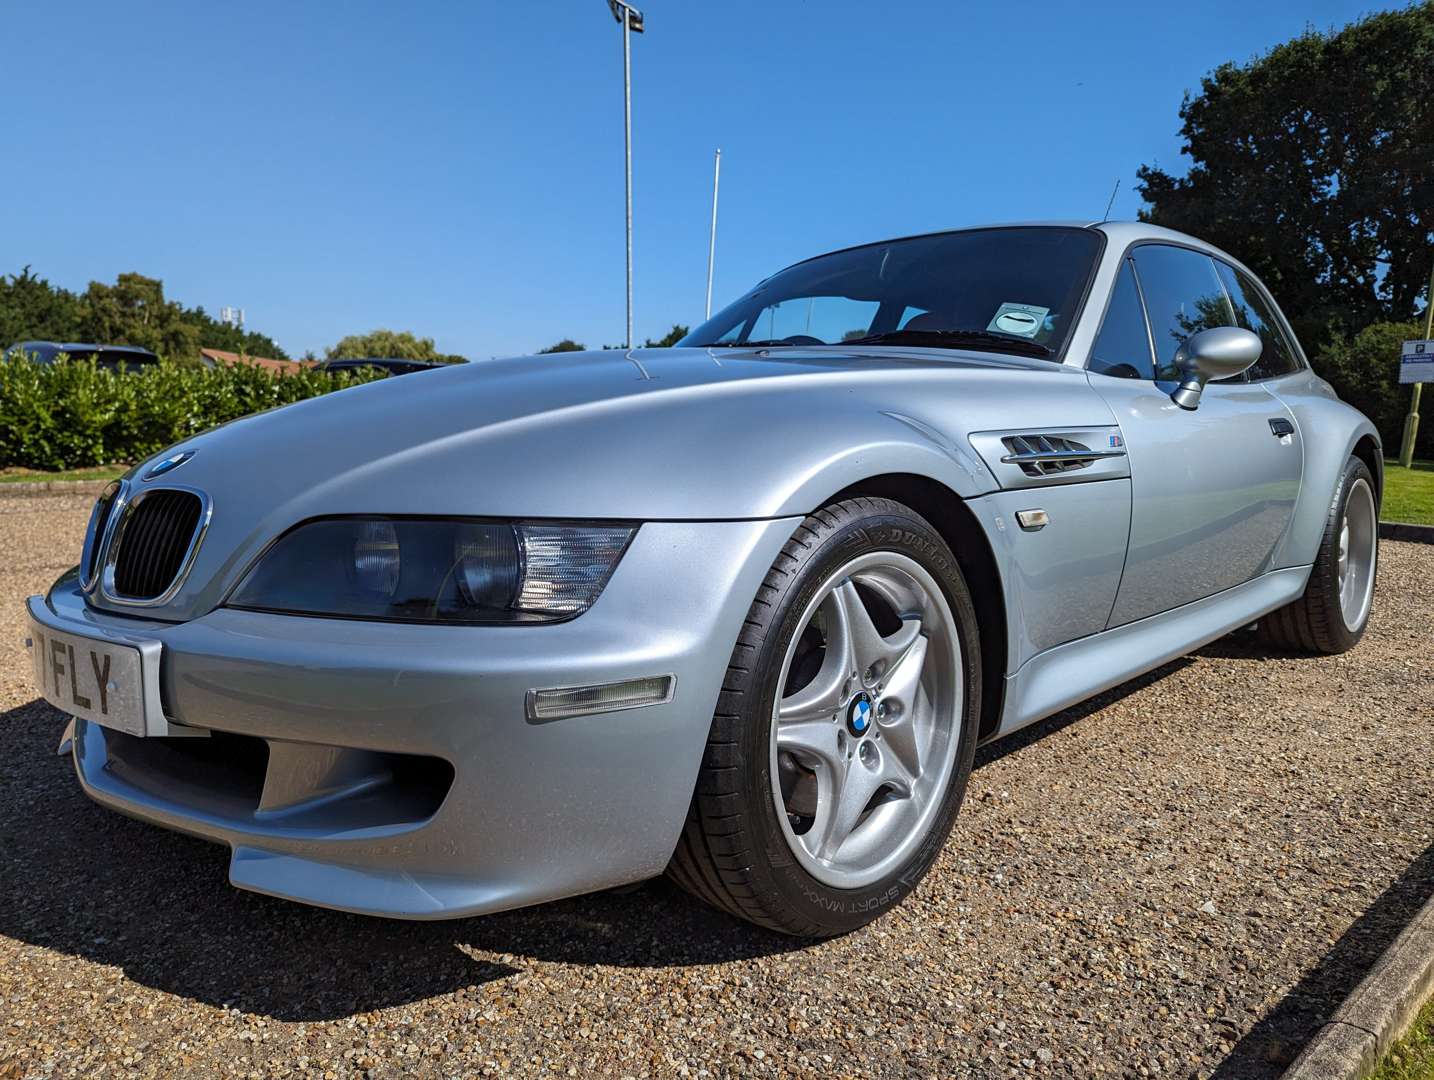 1999 BMW Z3 M COUPE 31,800 MILES, Saturday 19th & Sunday 20th August